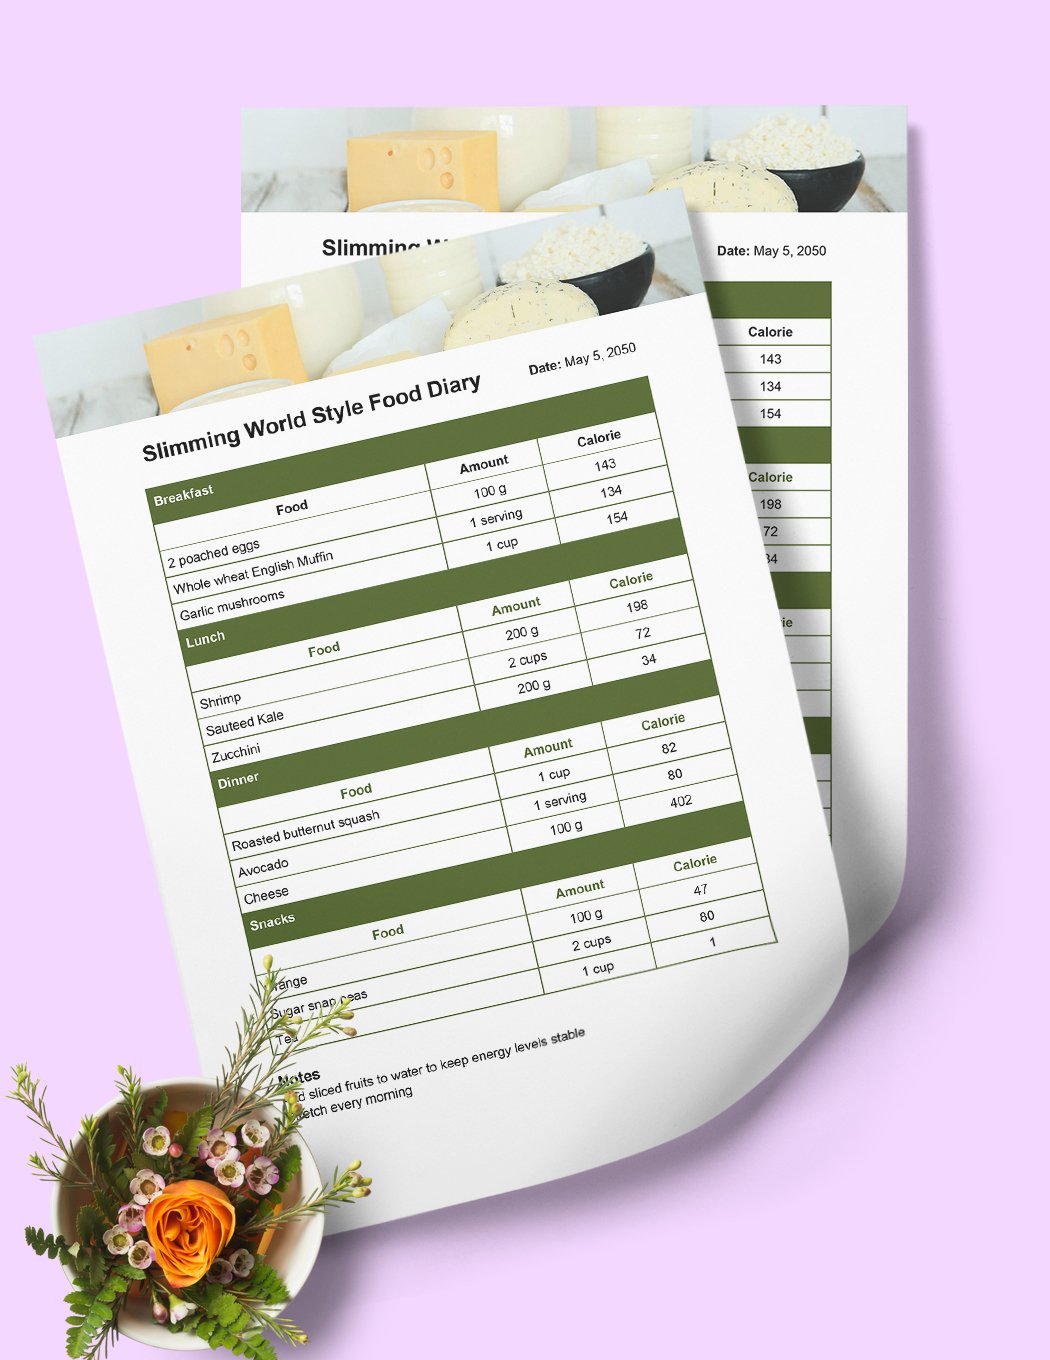 Slimming World Style Food Diary Template